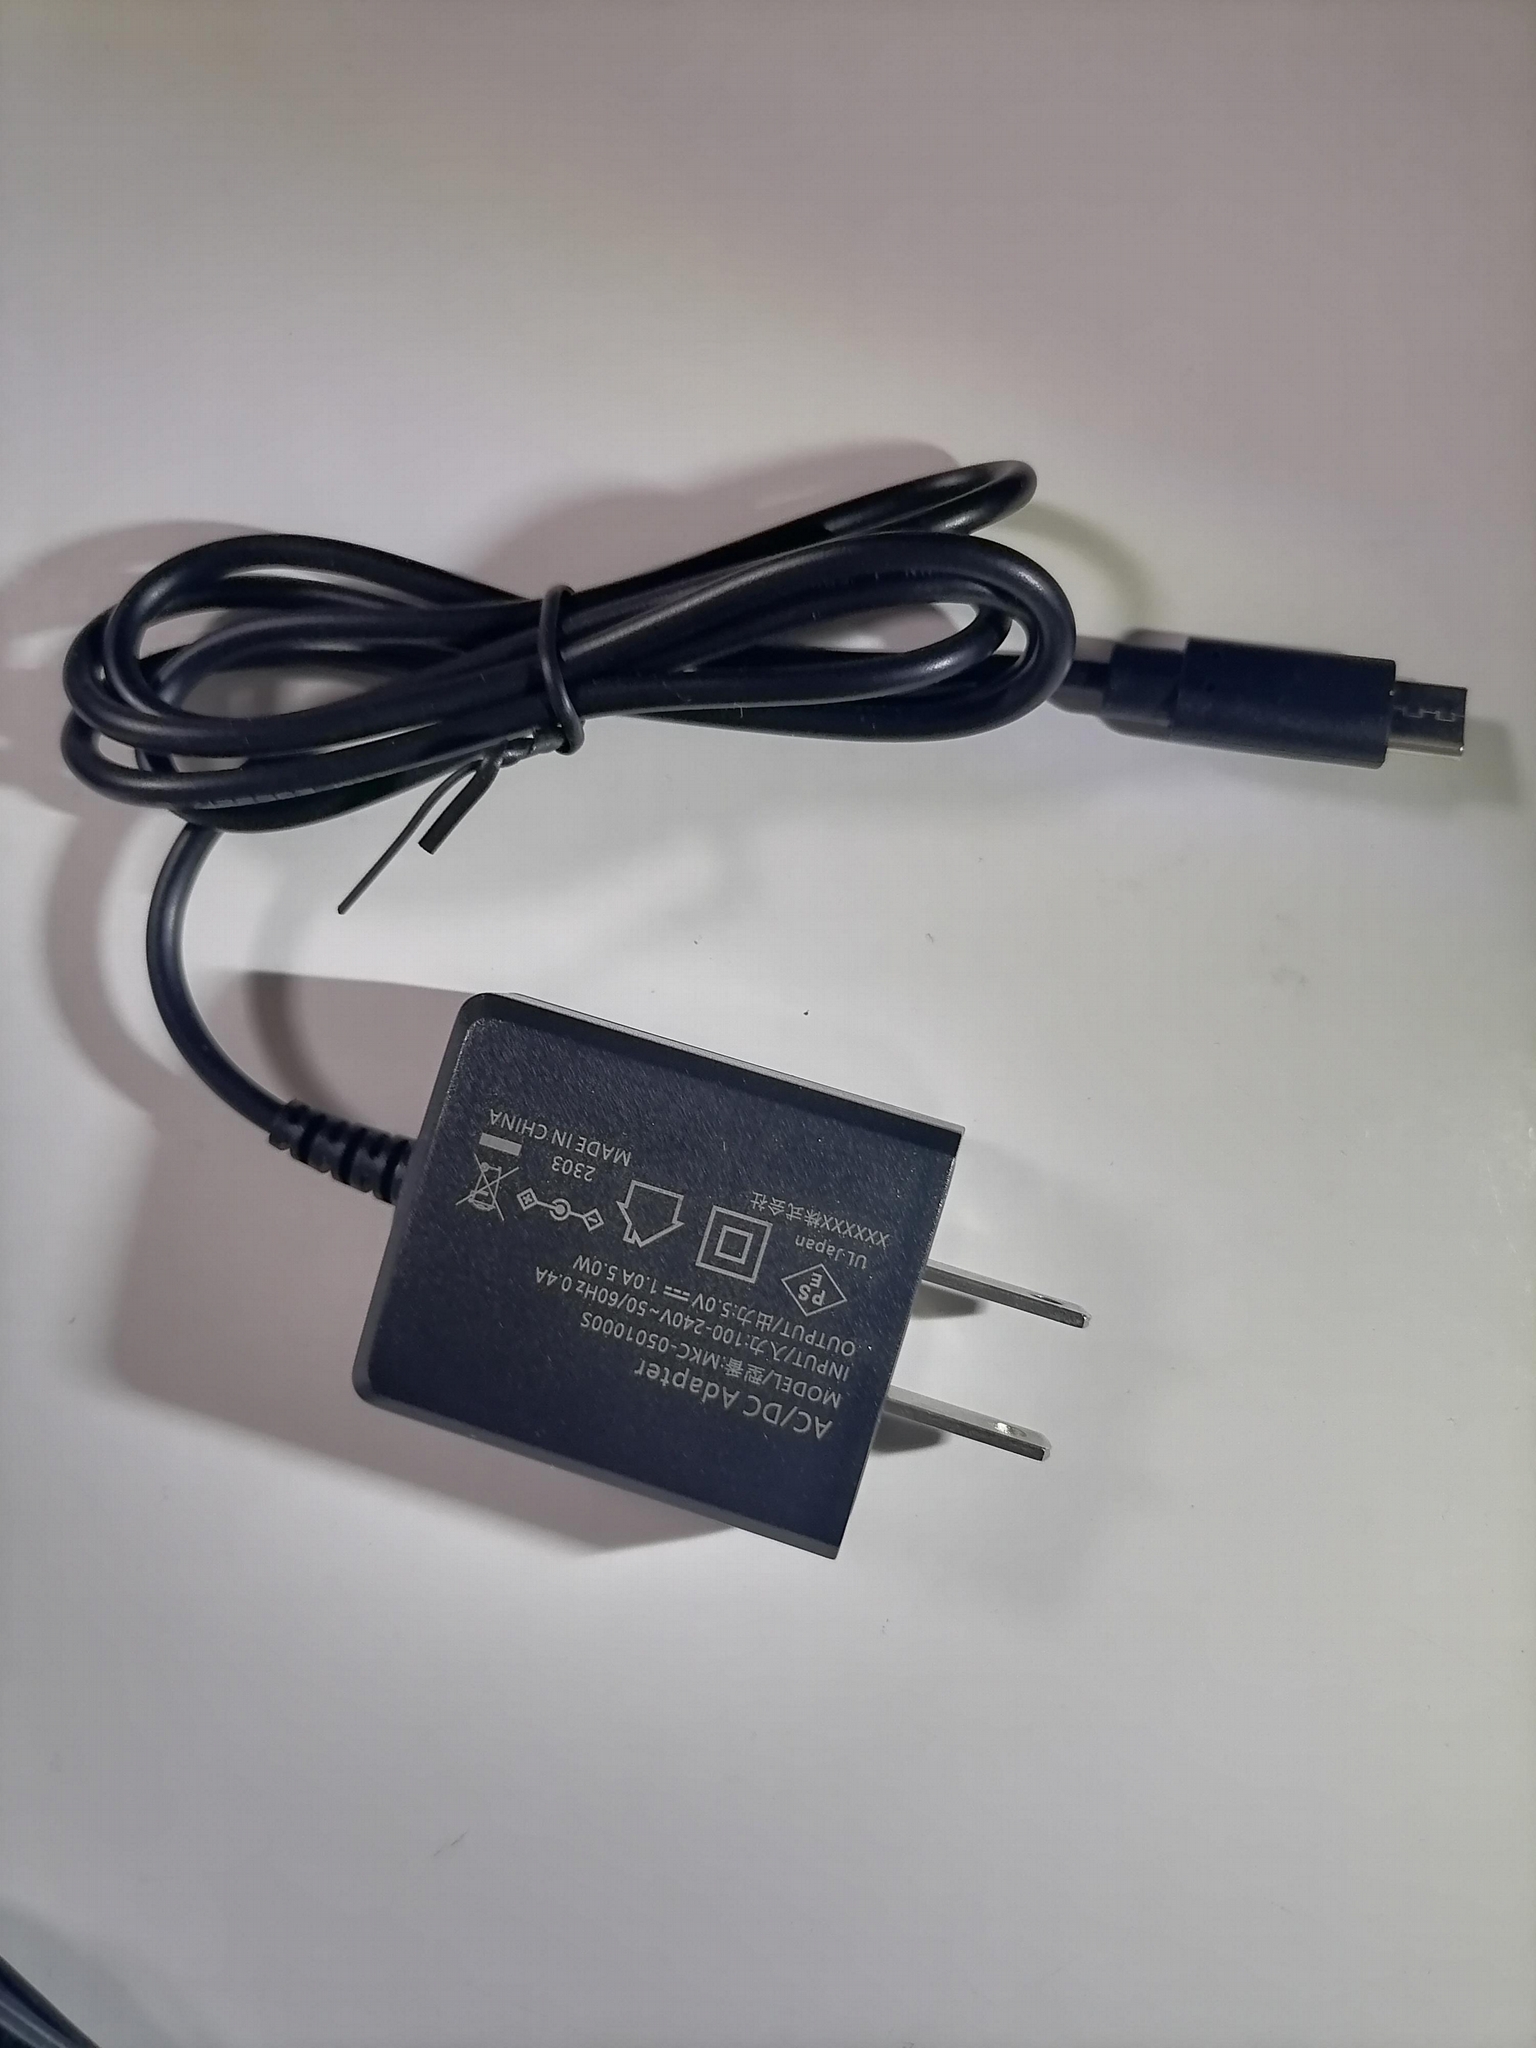 *Brand NEW*5V 1A AC adapter MKS-0501000S Merryking power supply